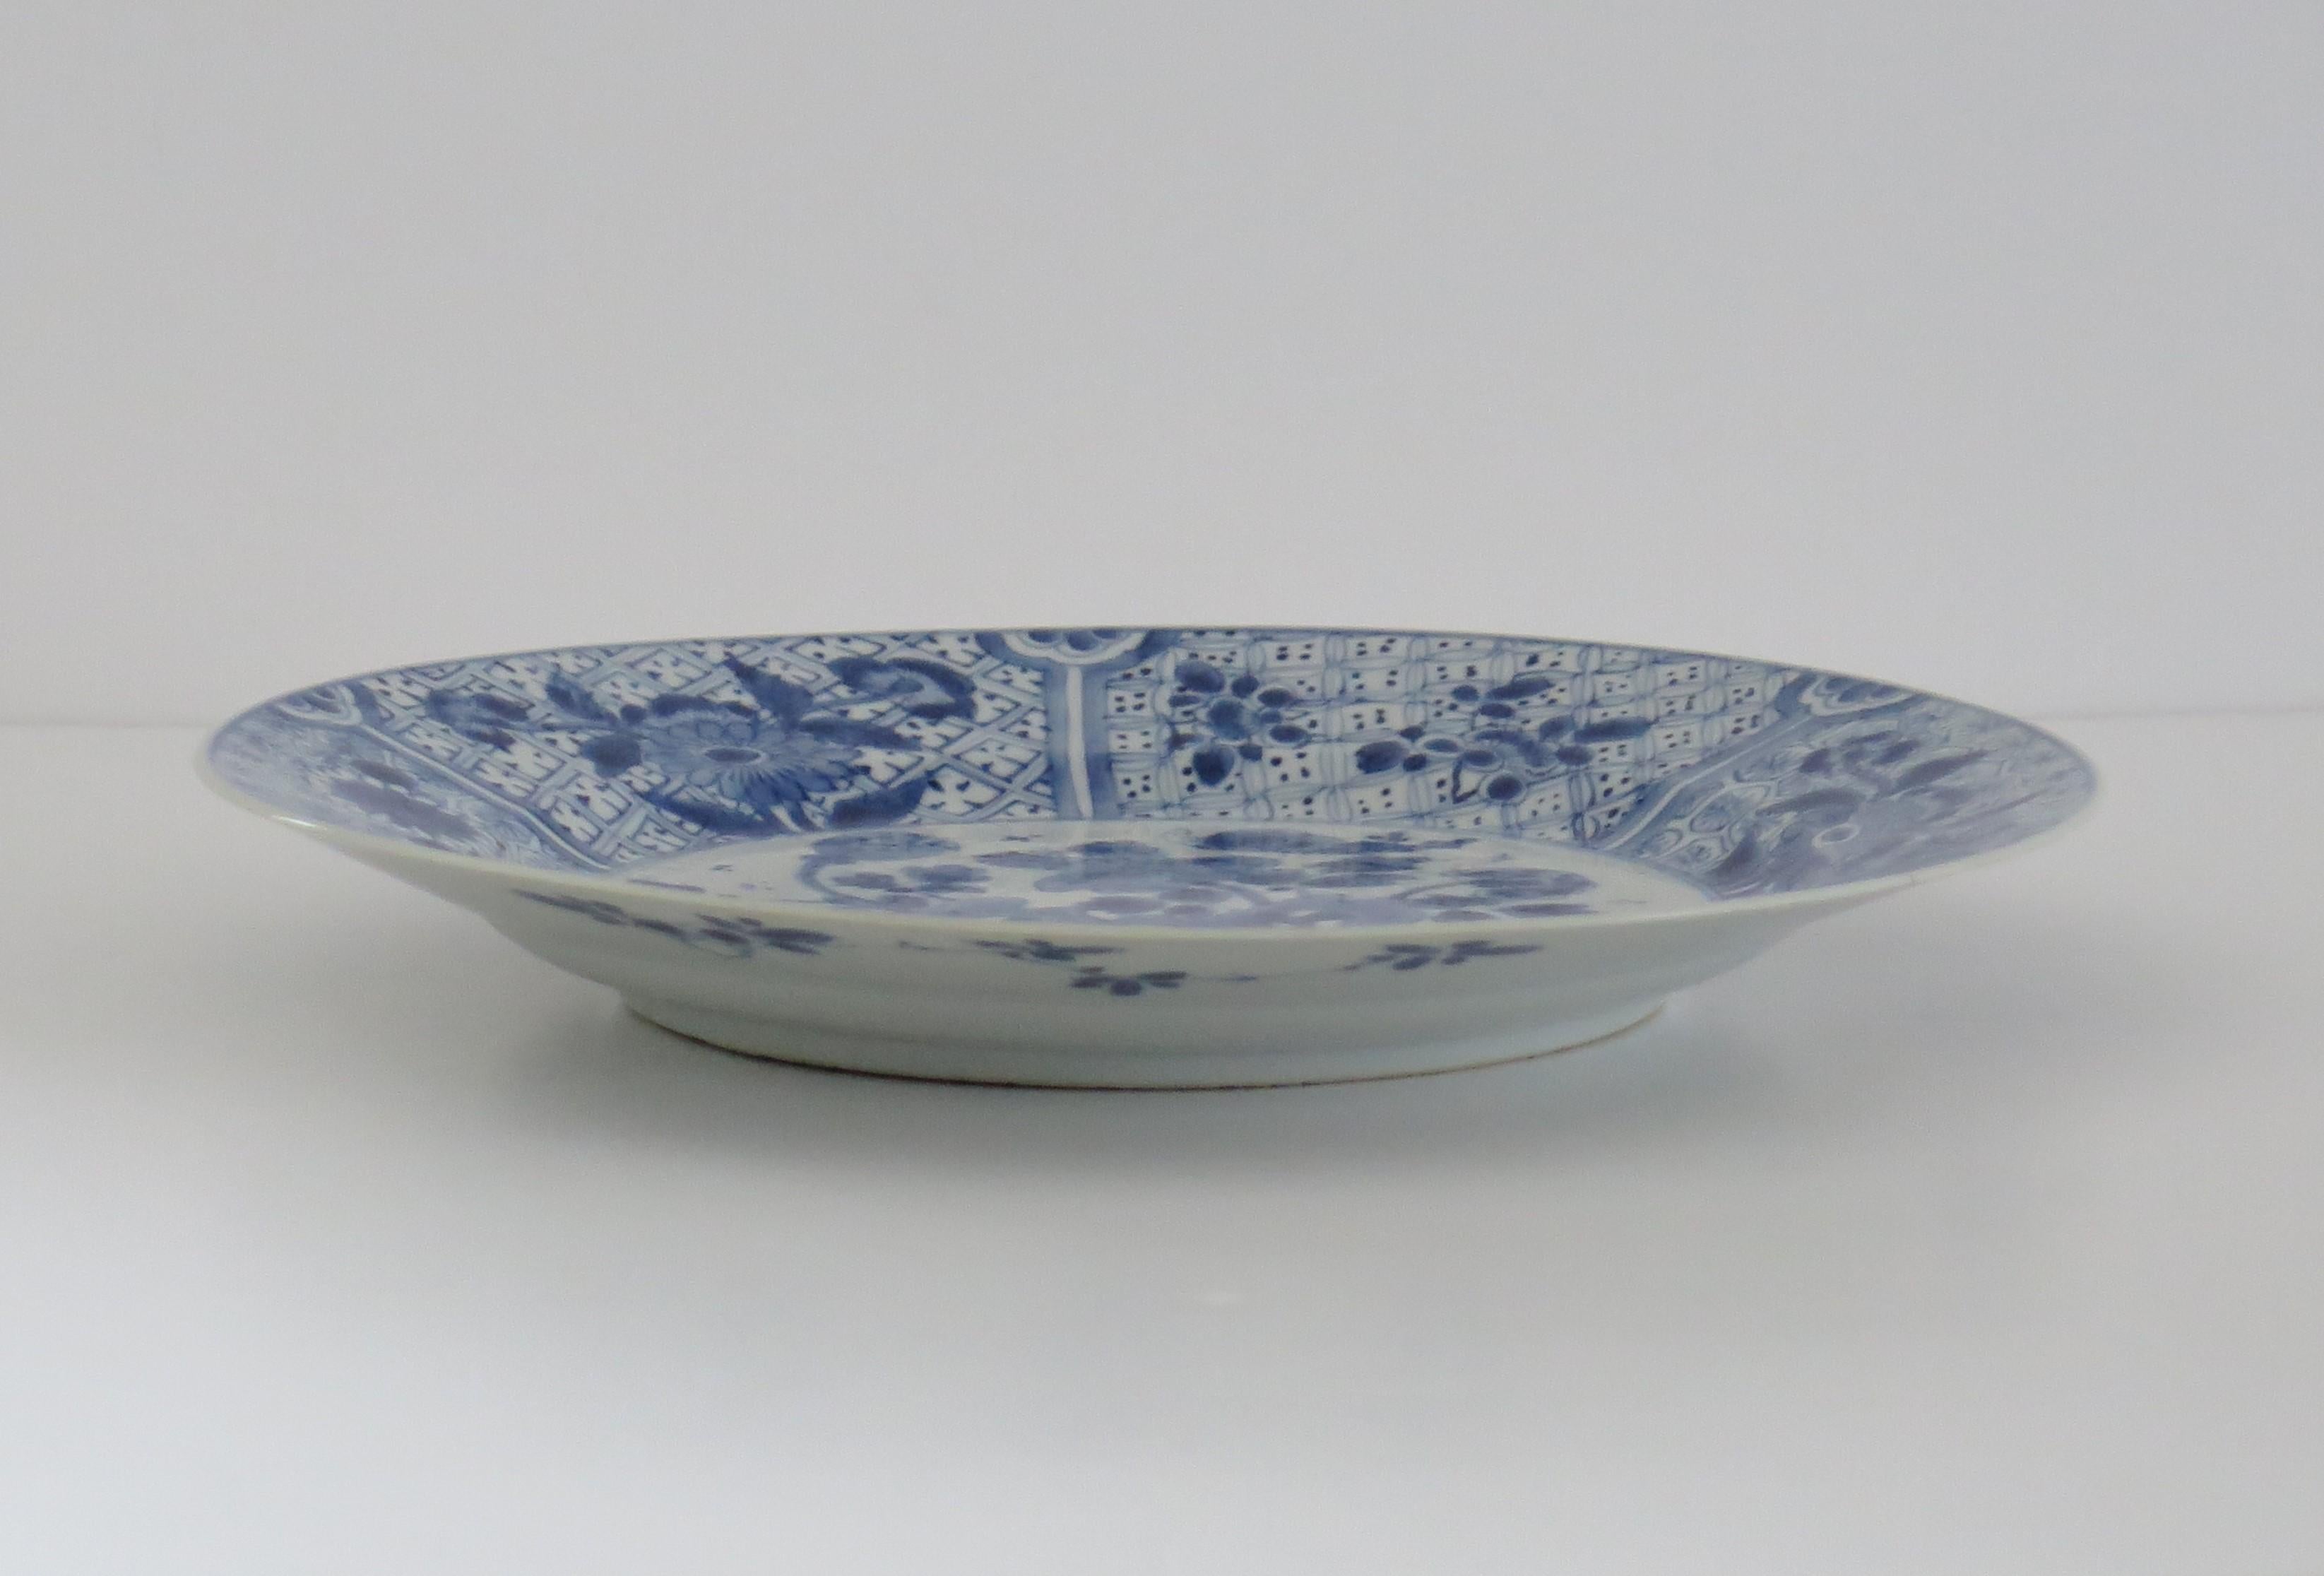 Chinese Kangxi Mark & period Plate or Dish Porcelain Blue & White, Ca 1700 For Sale 7